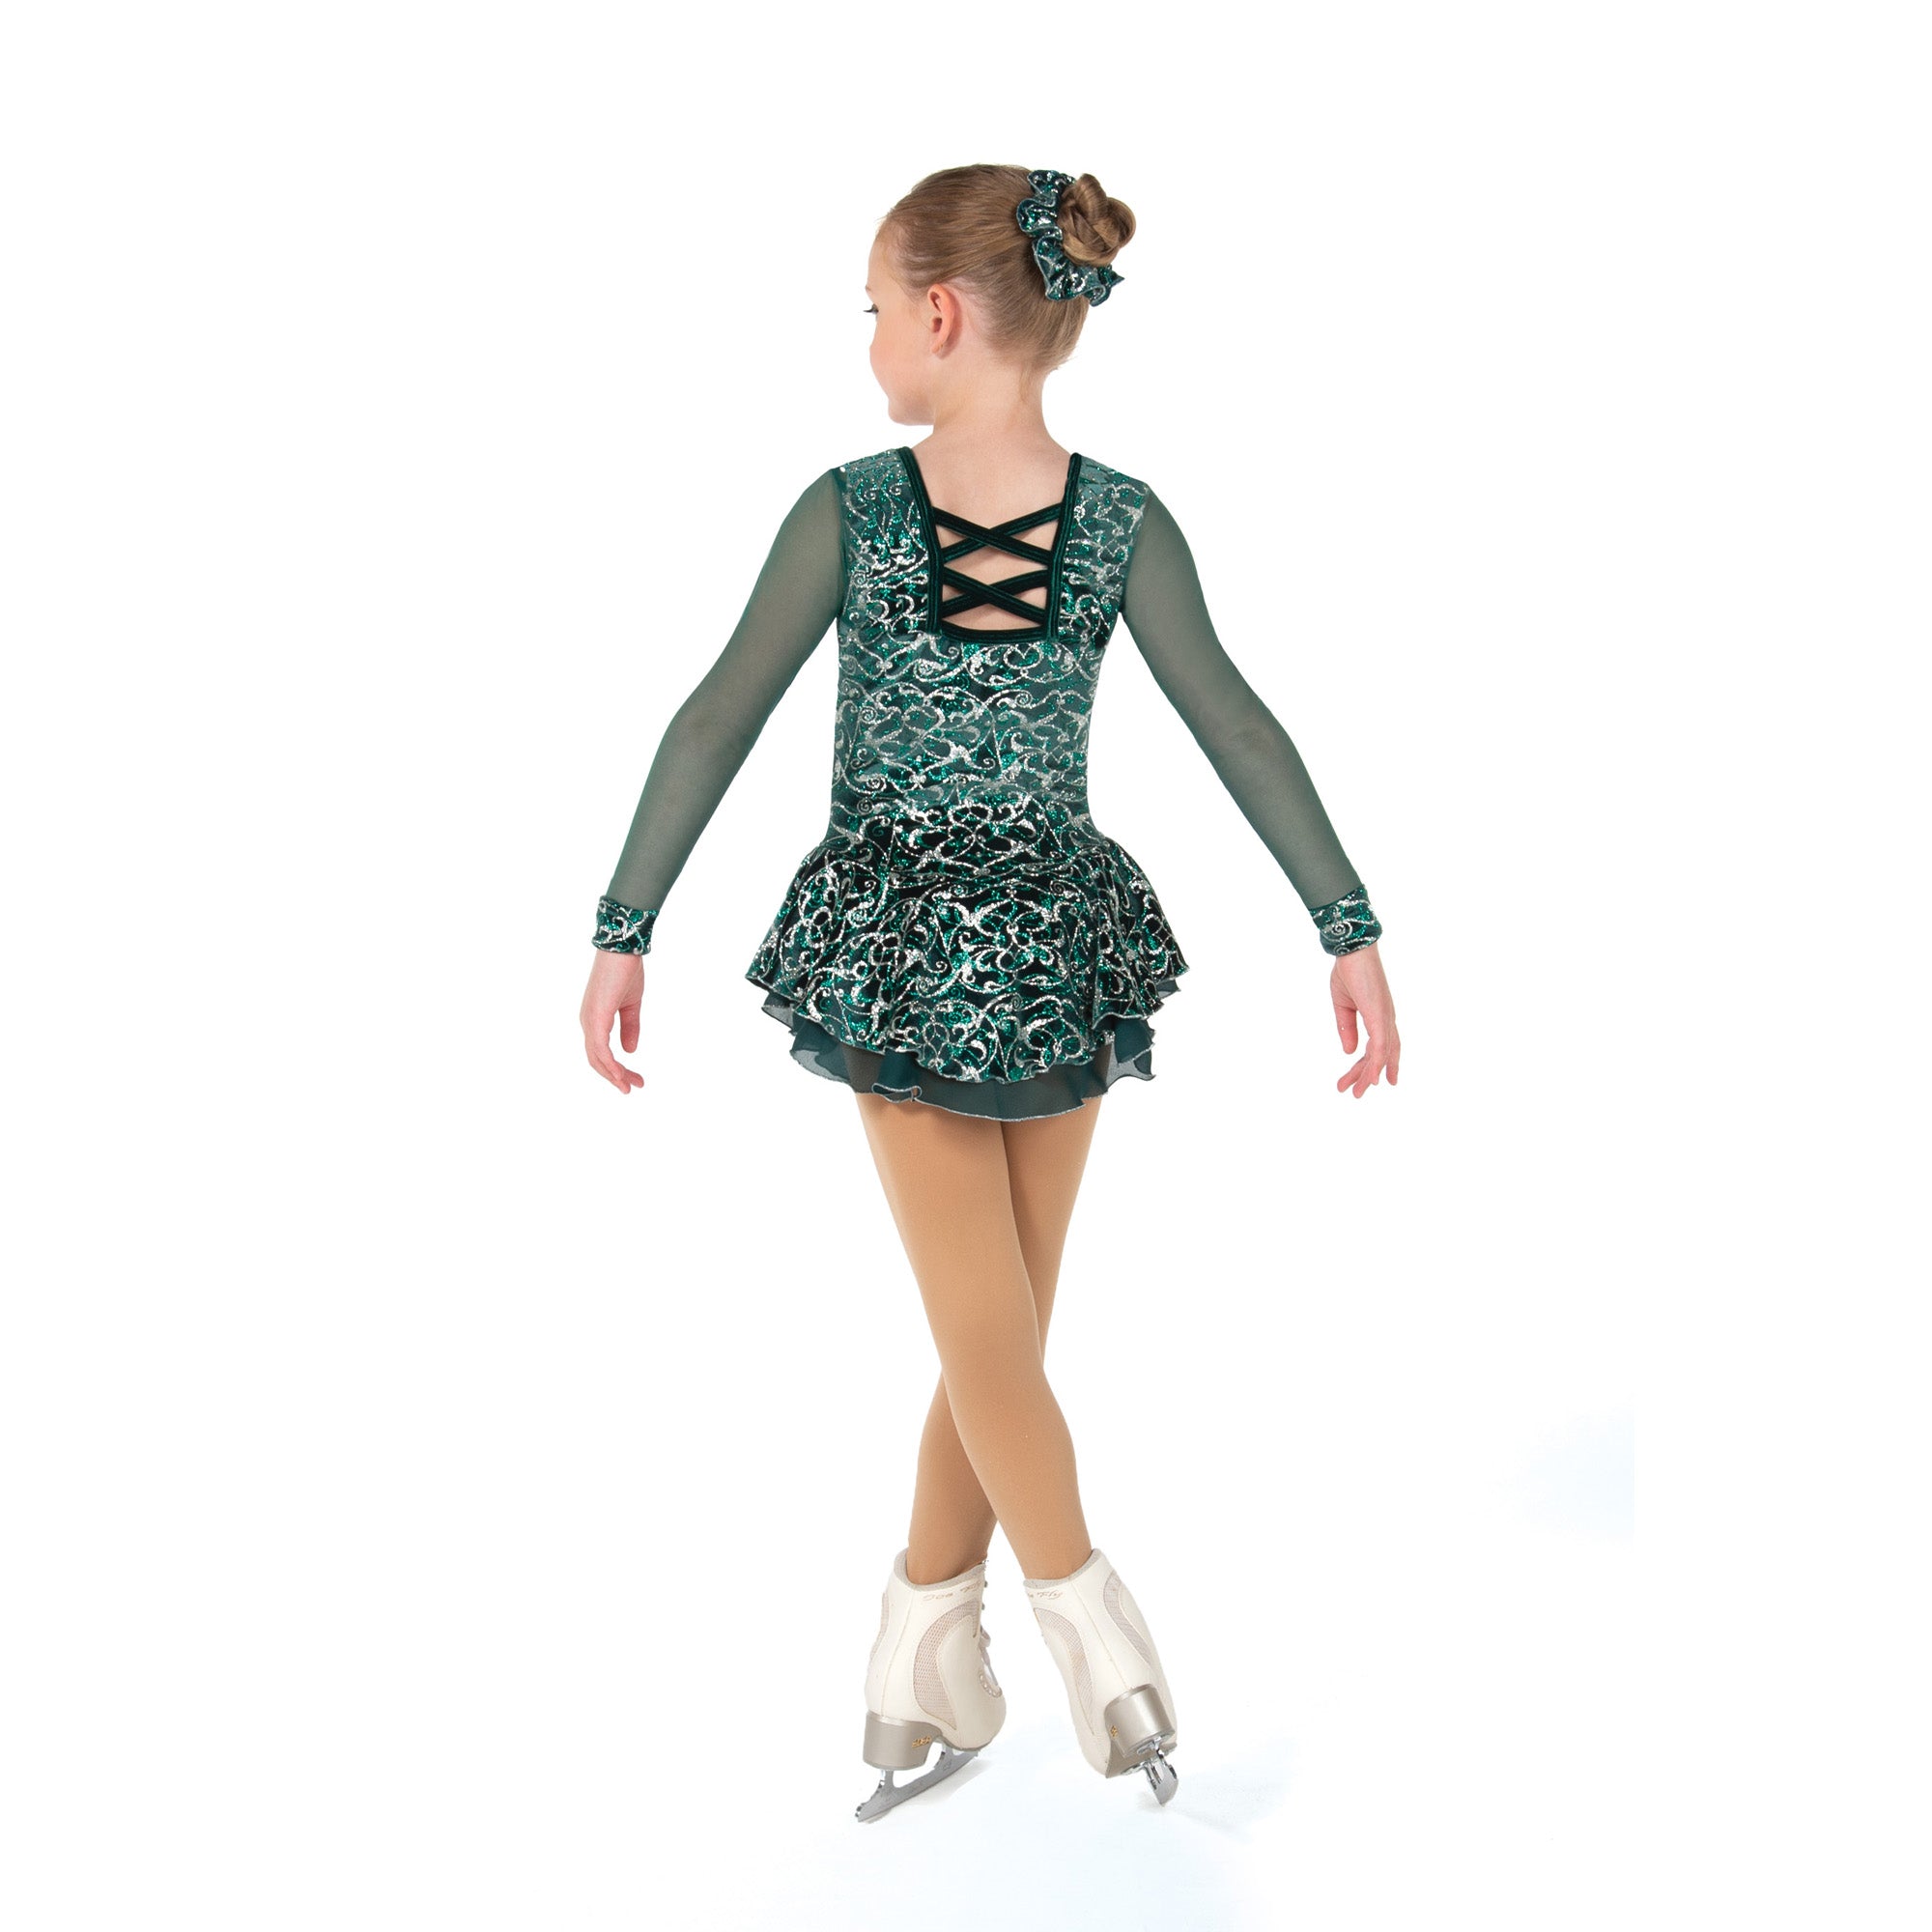 153 Field of Emeralds Skating Dress by Jerry's